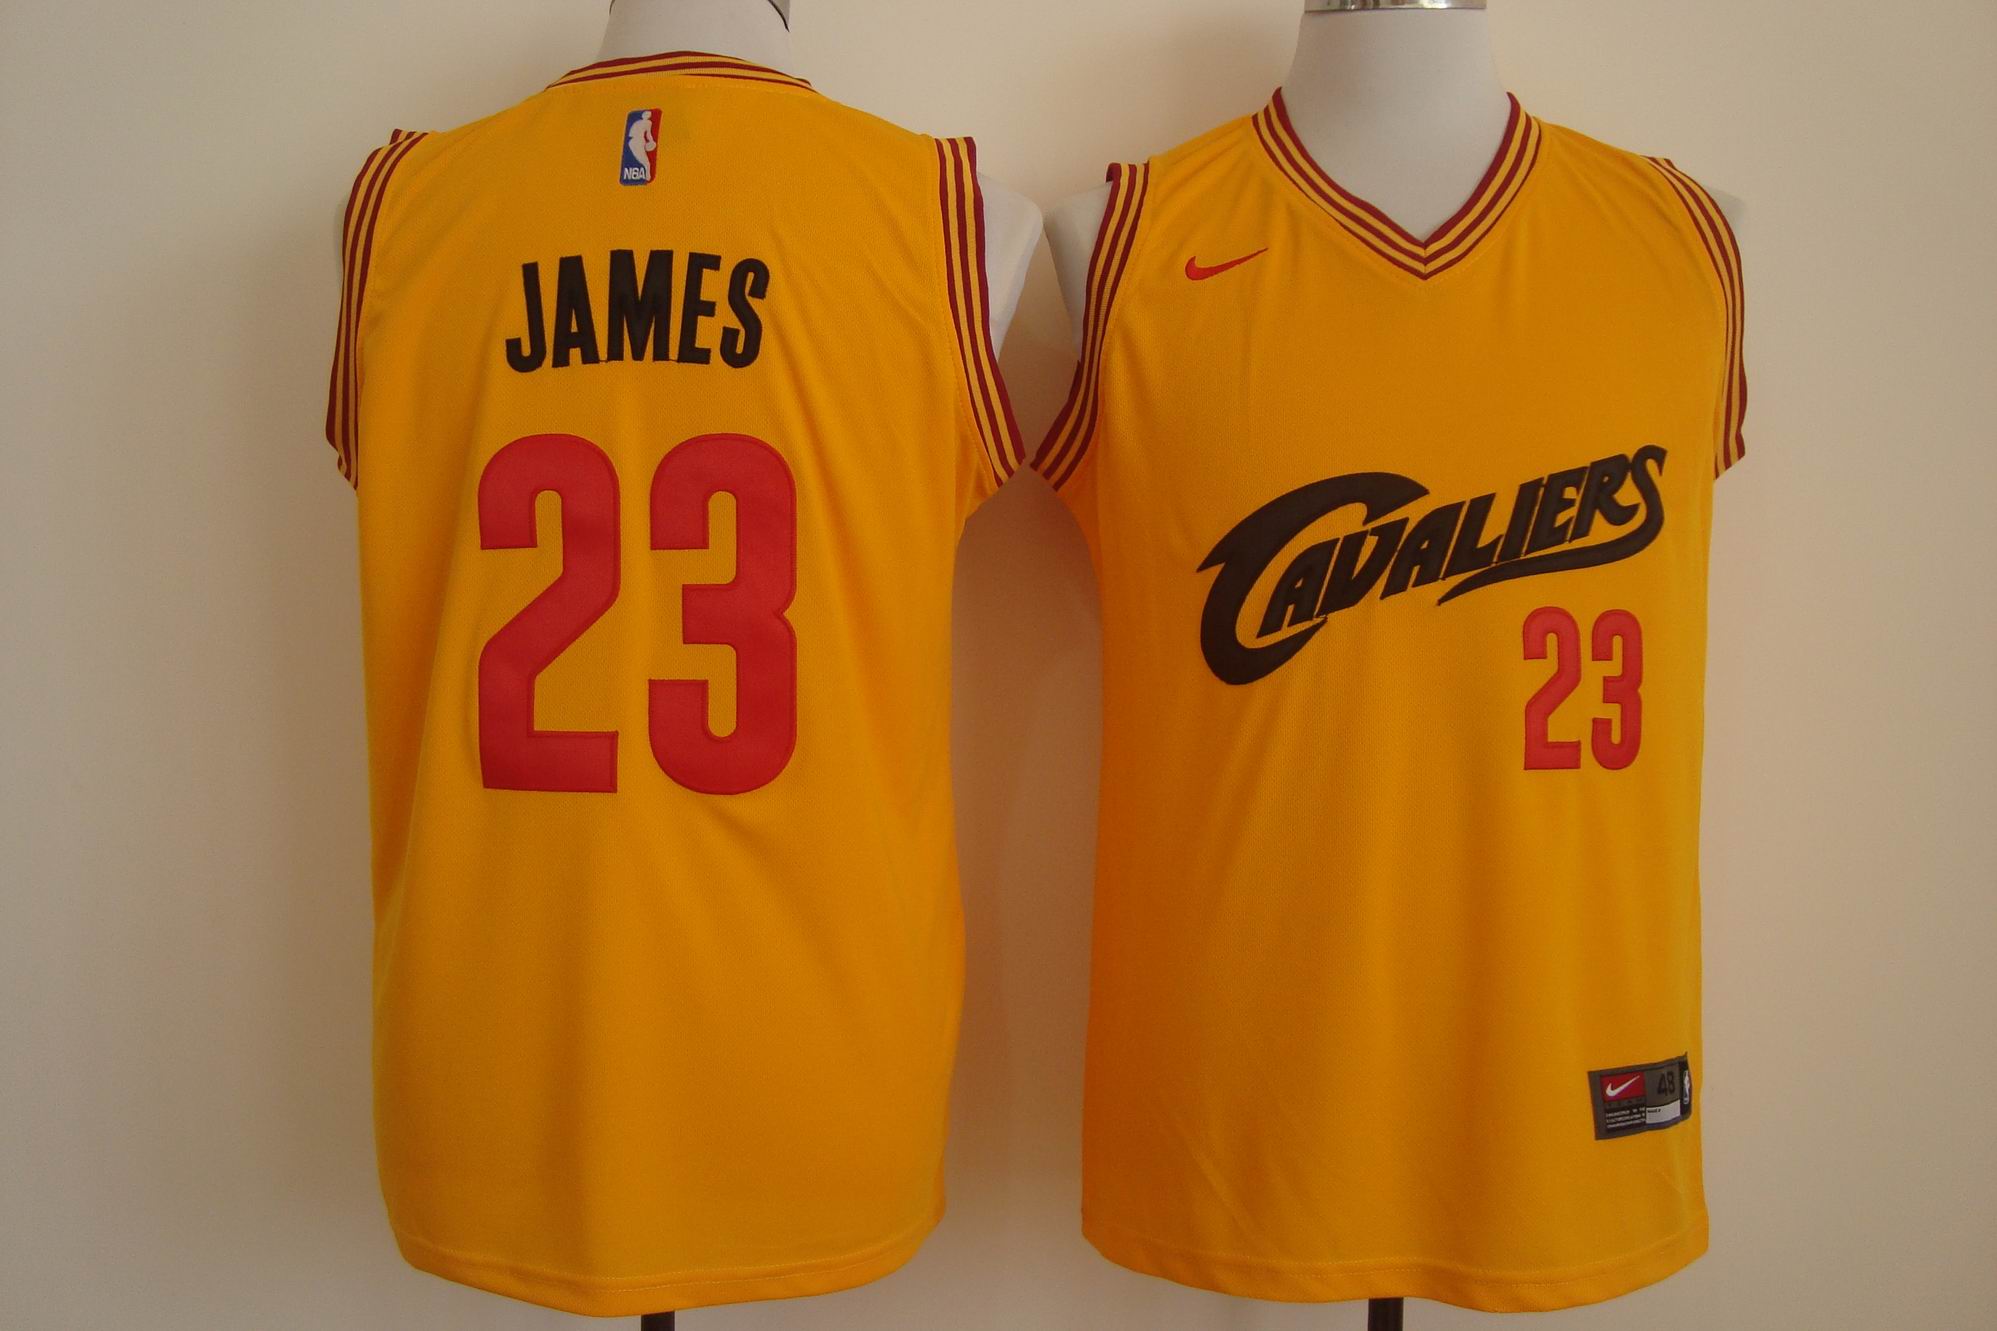 Men's Nike Cleveland Cavaliers #23 LeBron James Yellow and Red Stitched NBA Jersey